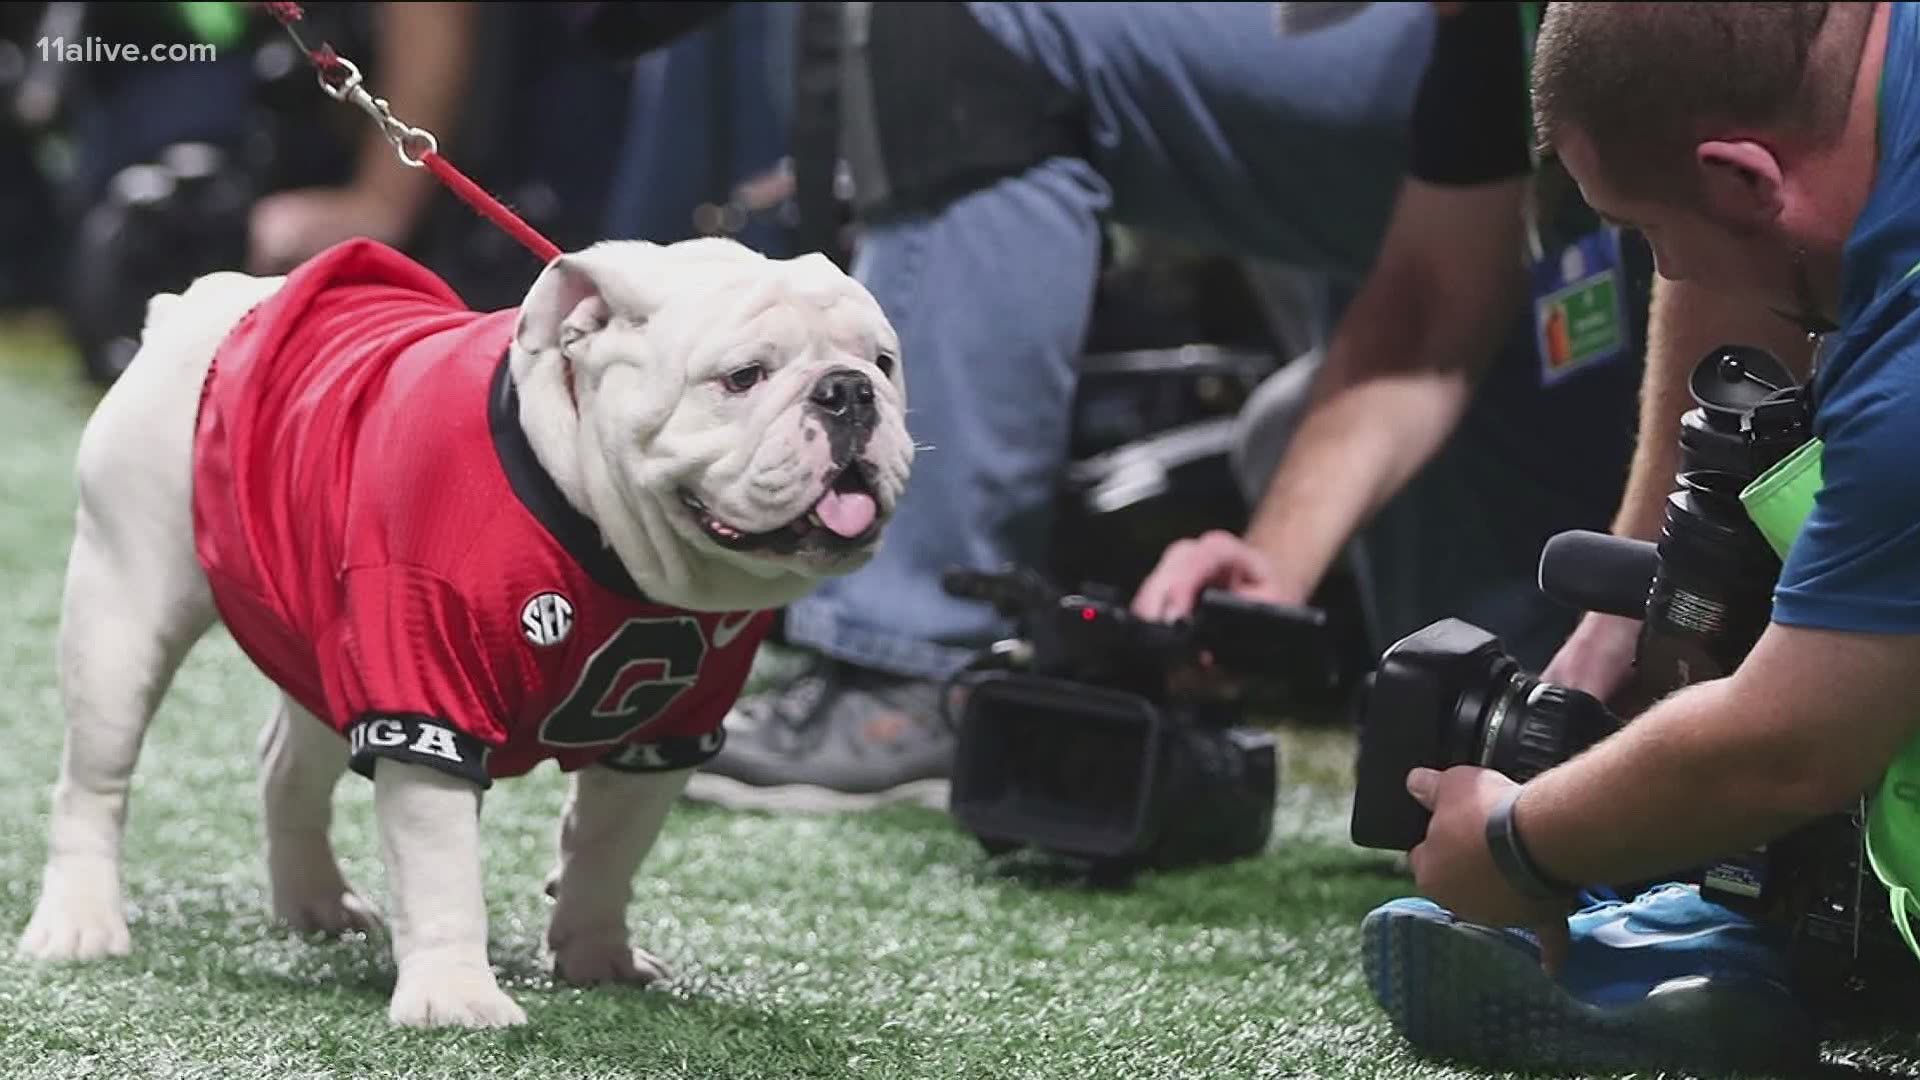 The bulldog mascot will not be allowed onto the field due to stipulations in SEC rules about essential personnel.